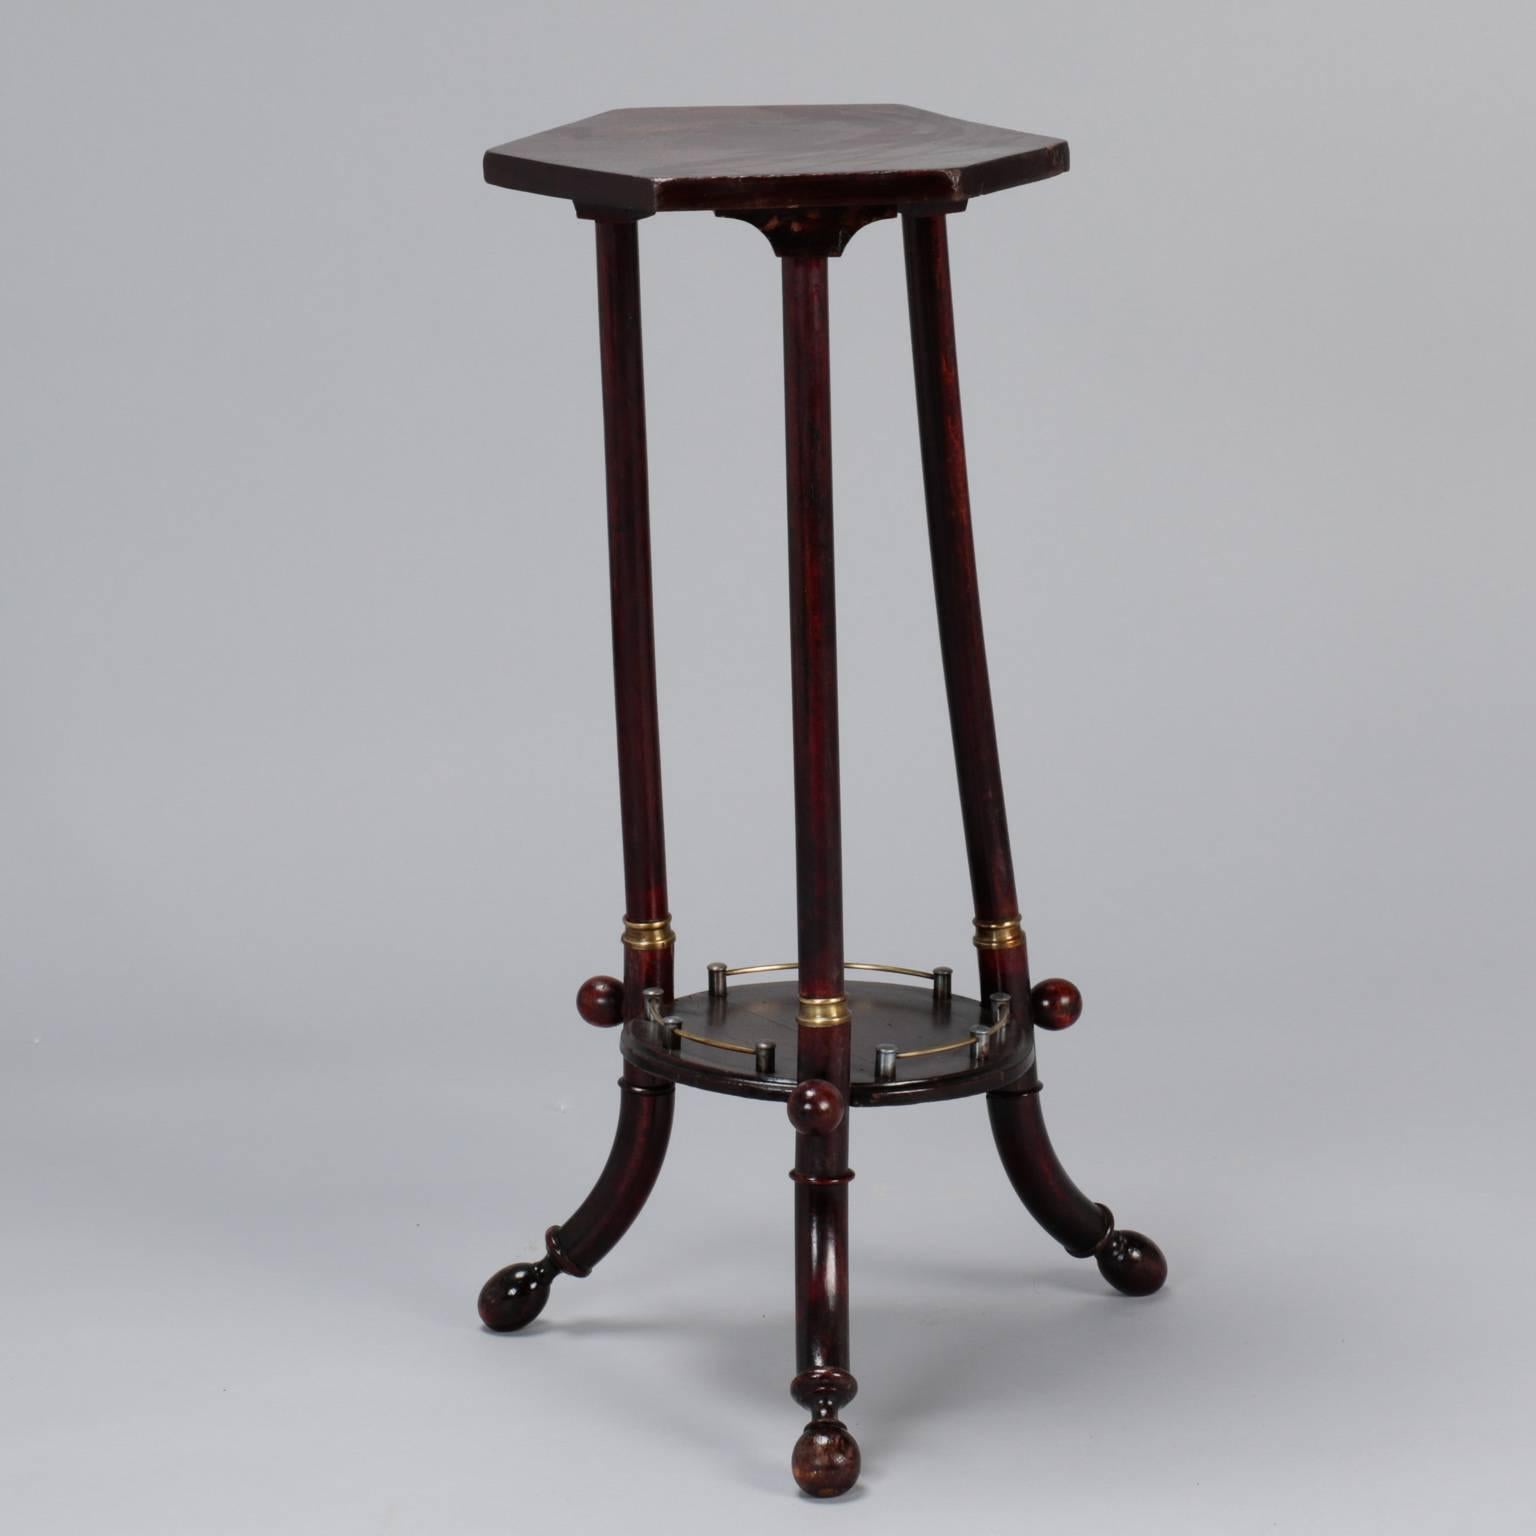 Slender Thonet side table in dark stained wood with three legs, lower shelf with brass gallery and trim and a six sided table top, circa 1930s.
     